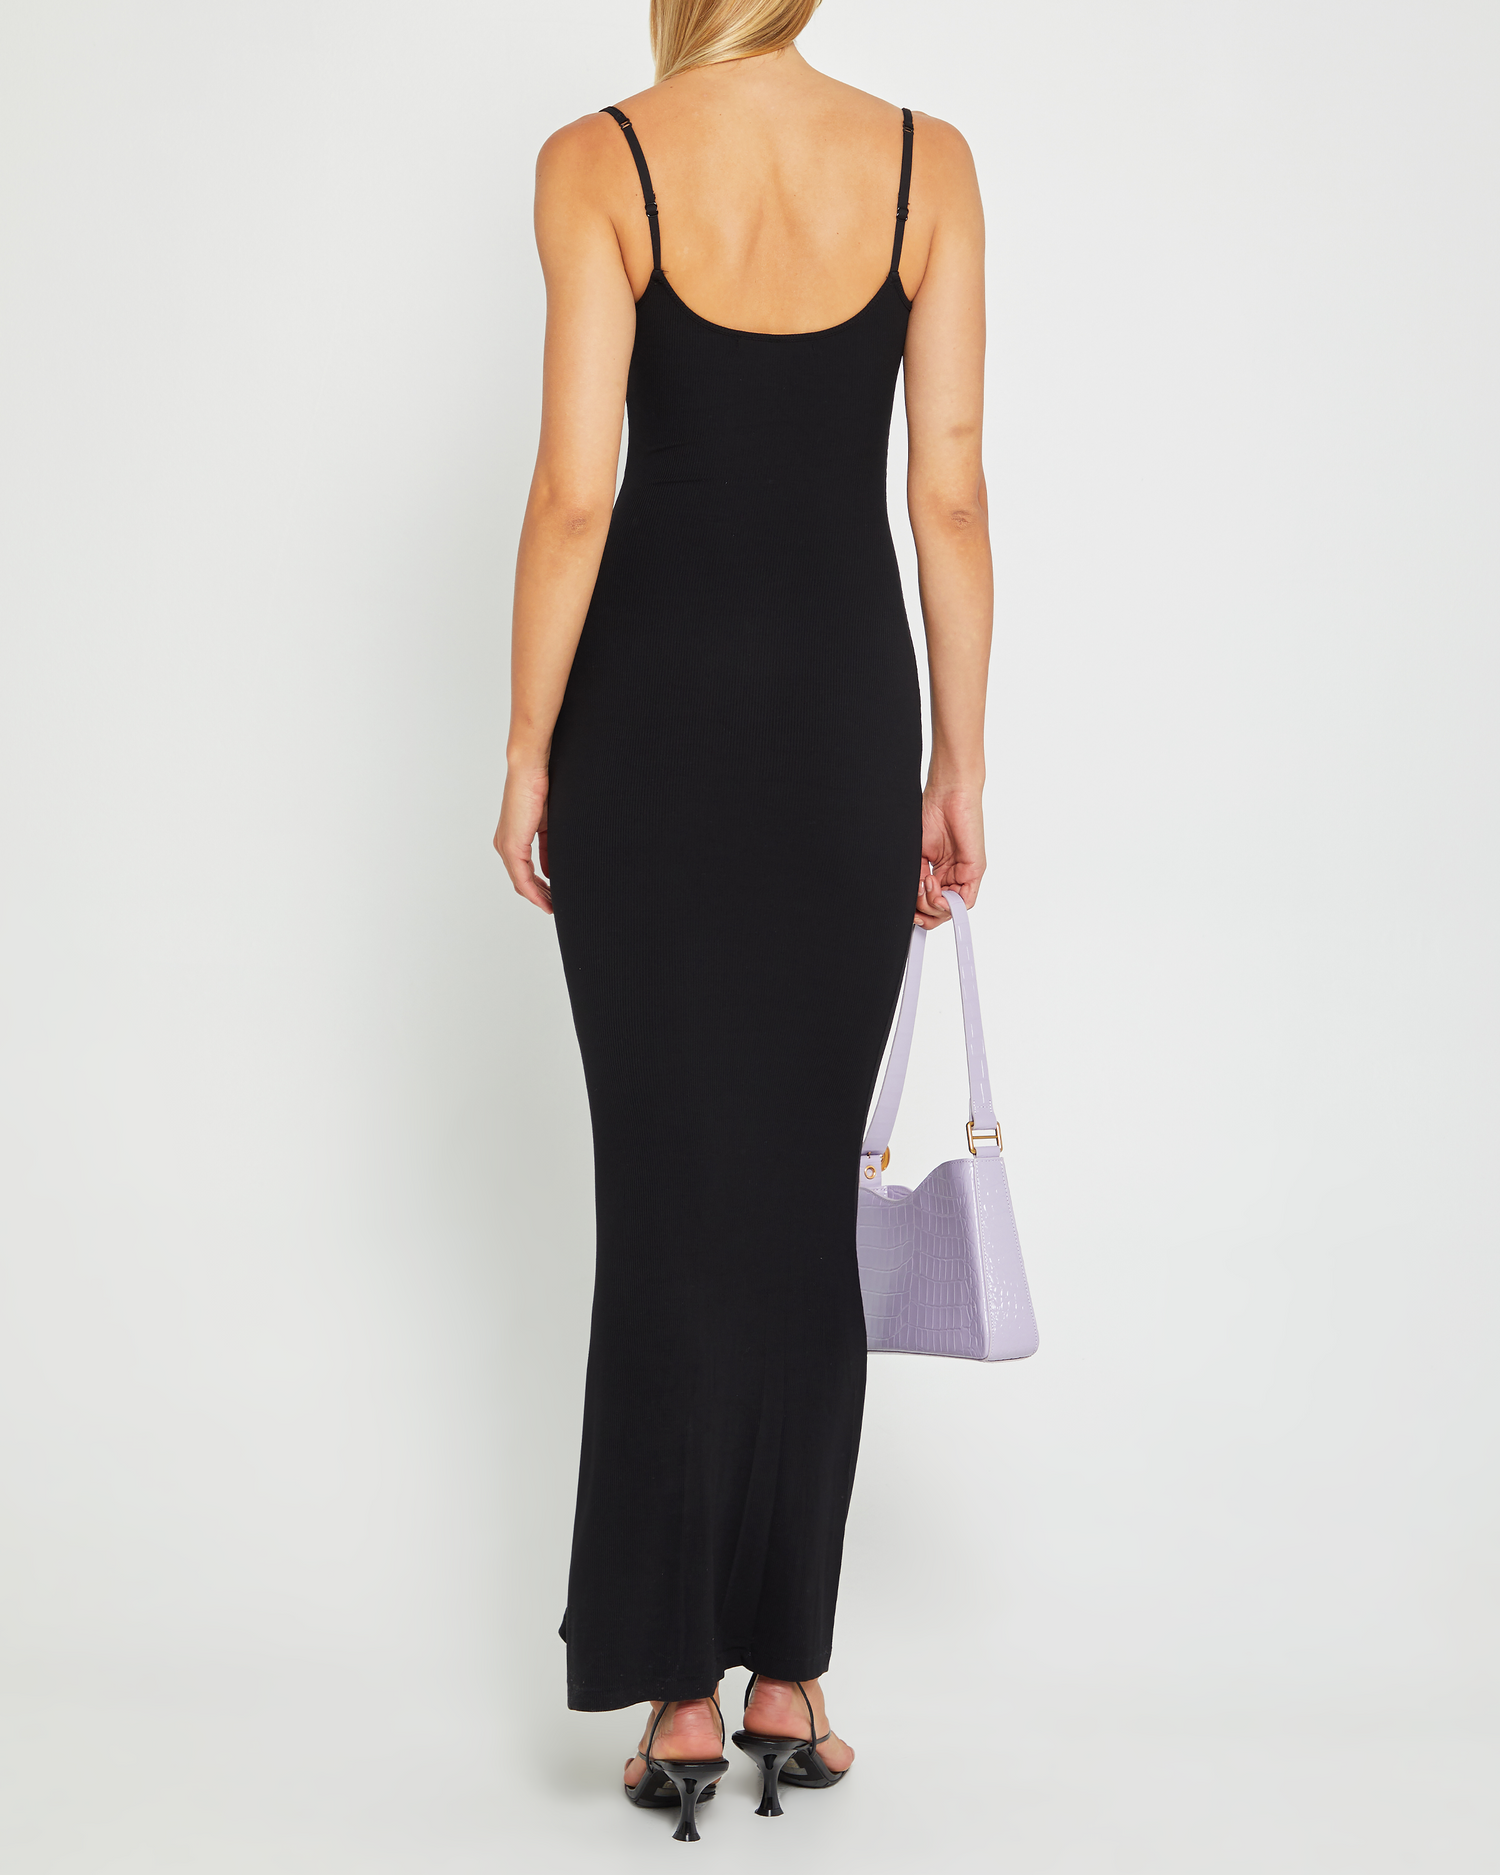 Skims Soft Lounge Petite Long Slip Dress In Stock Availability and